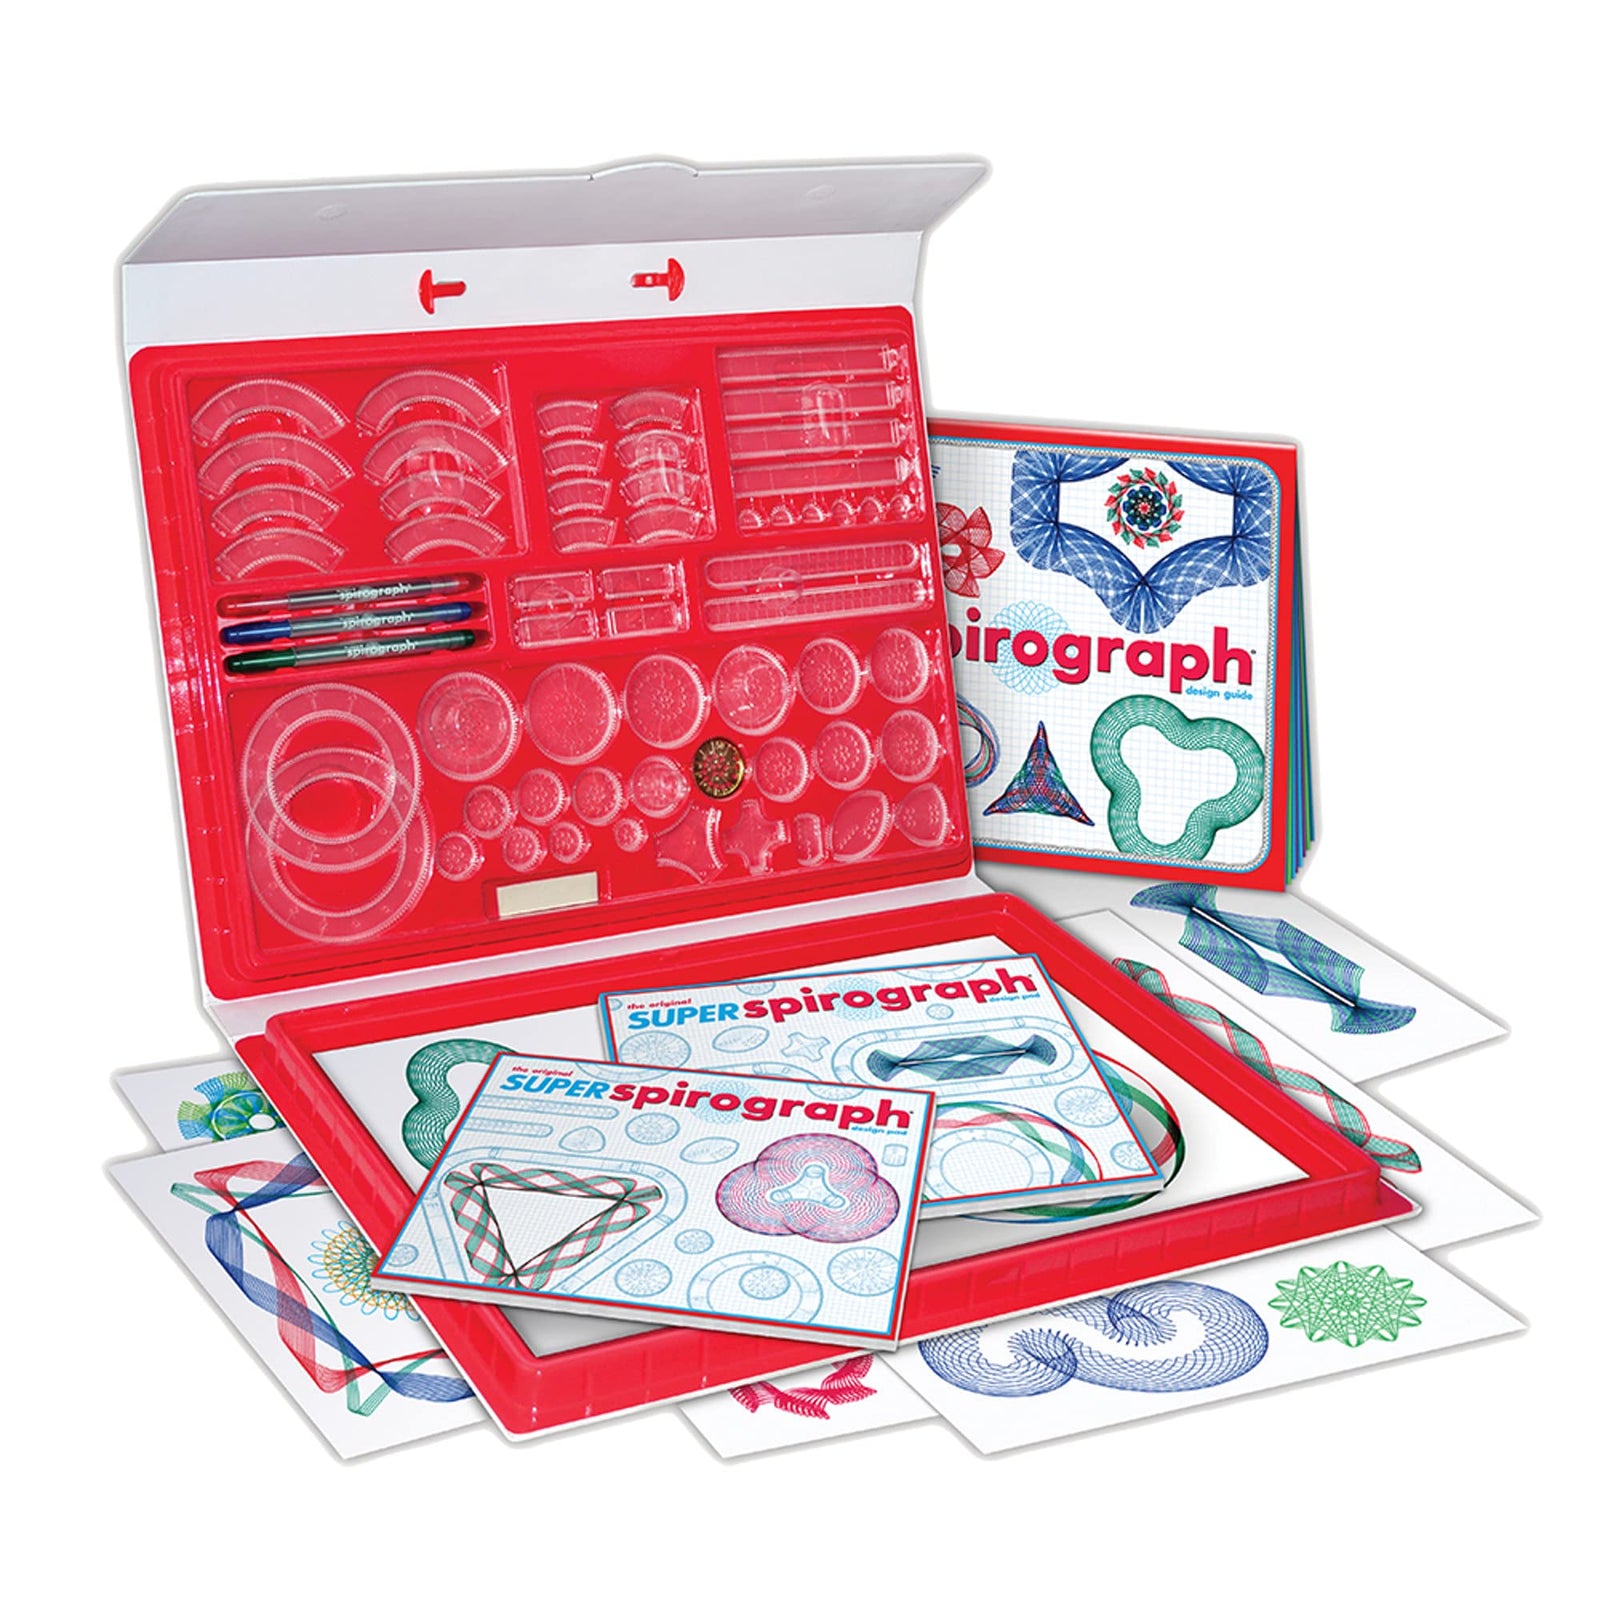 Super Spirograph Design Set-- 50th Anniversary Edition with Twice as Many Gears -- For Ages 8+